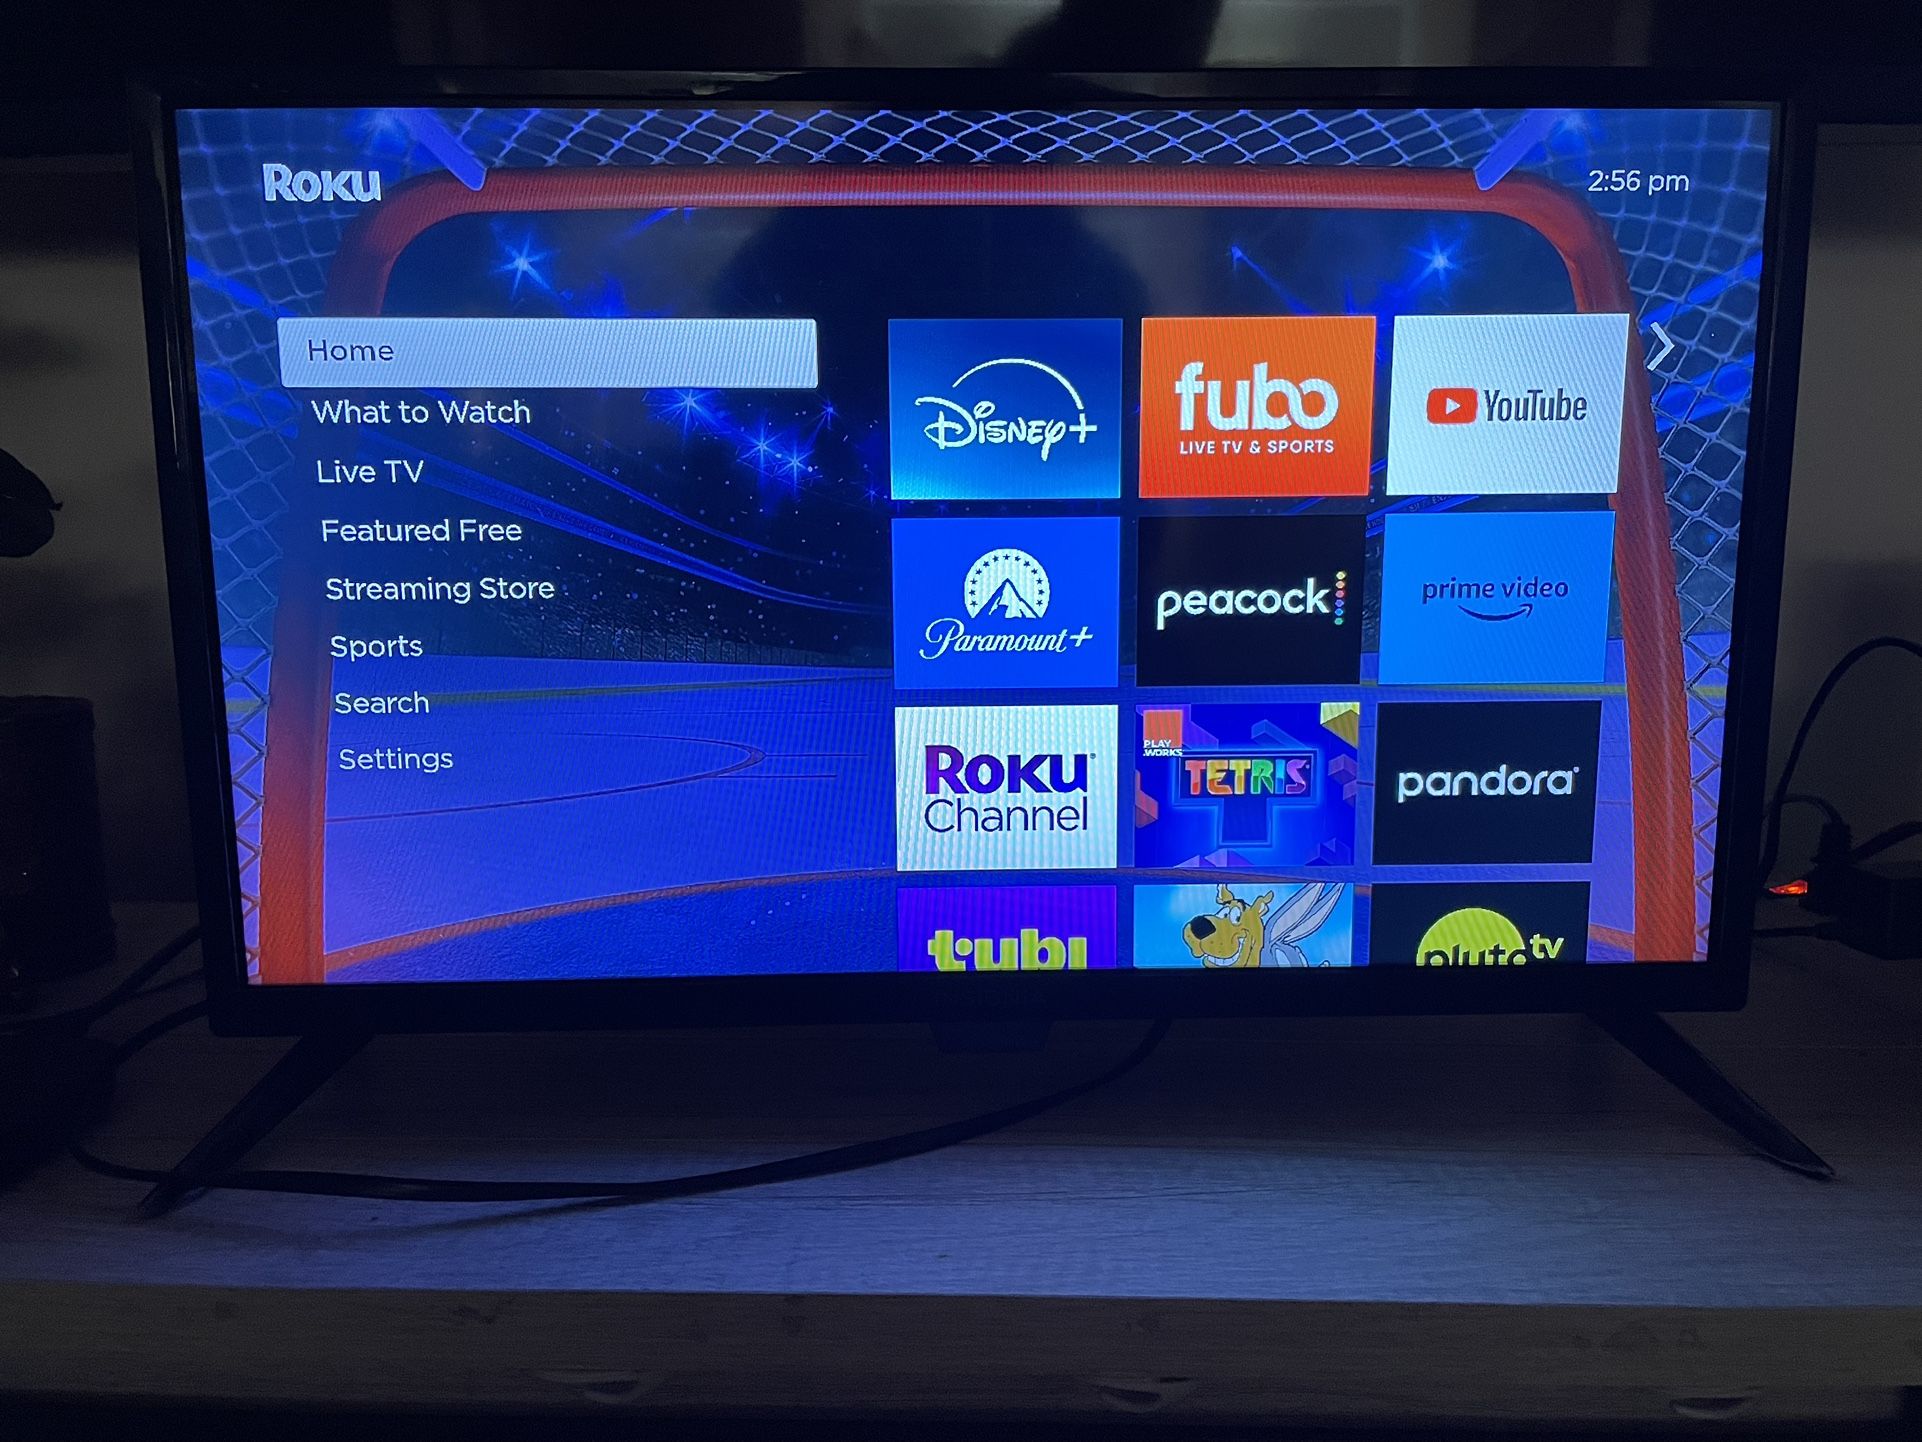 Smart Fire TV with Glow in the dark remote